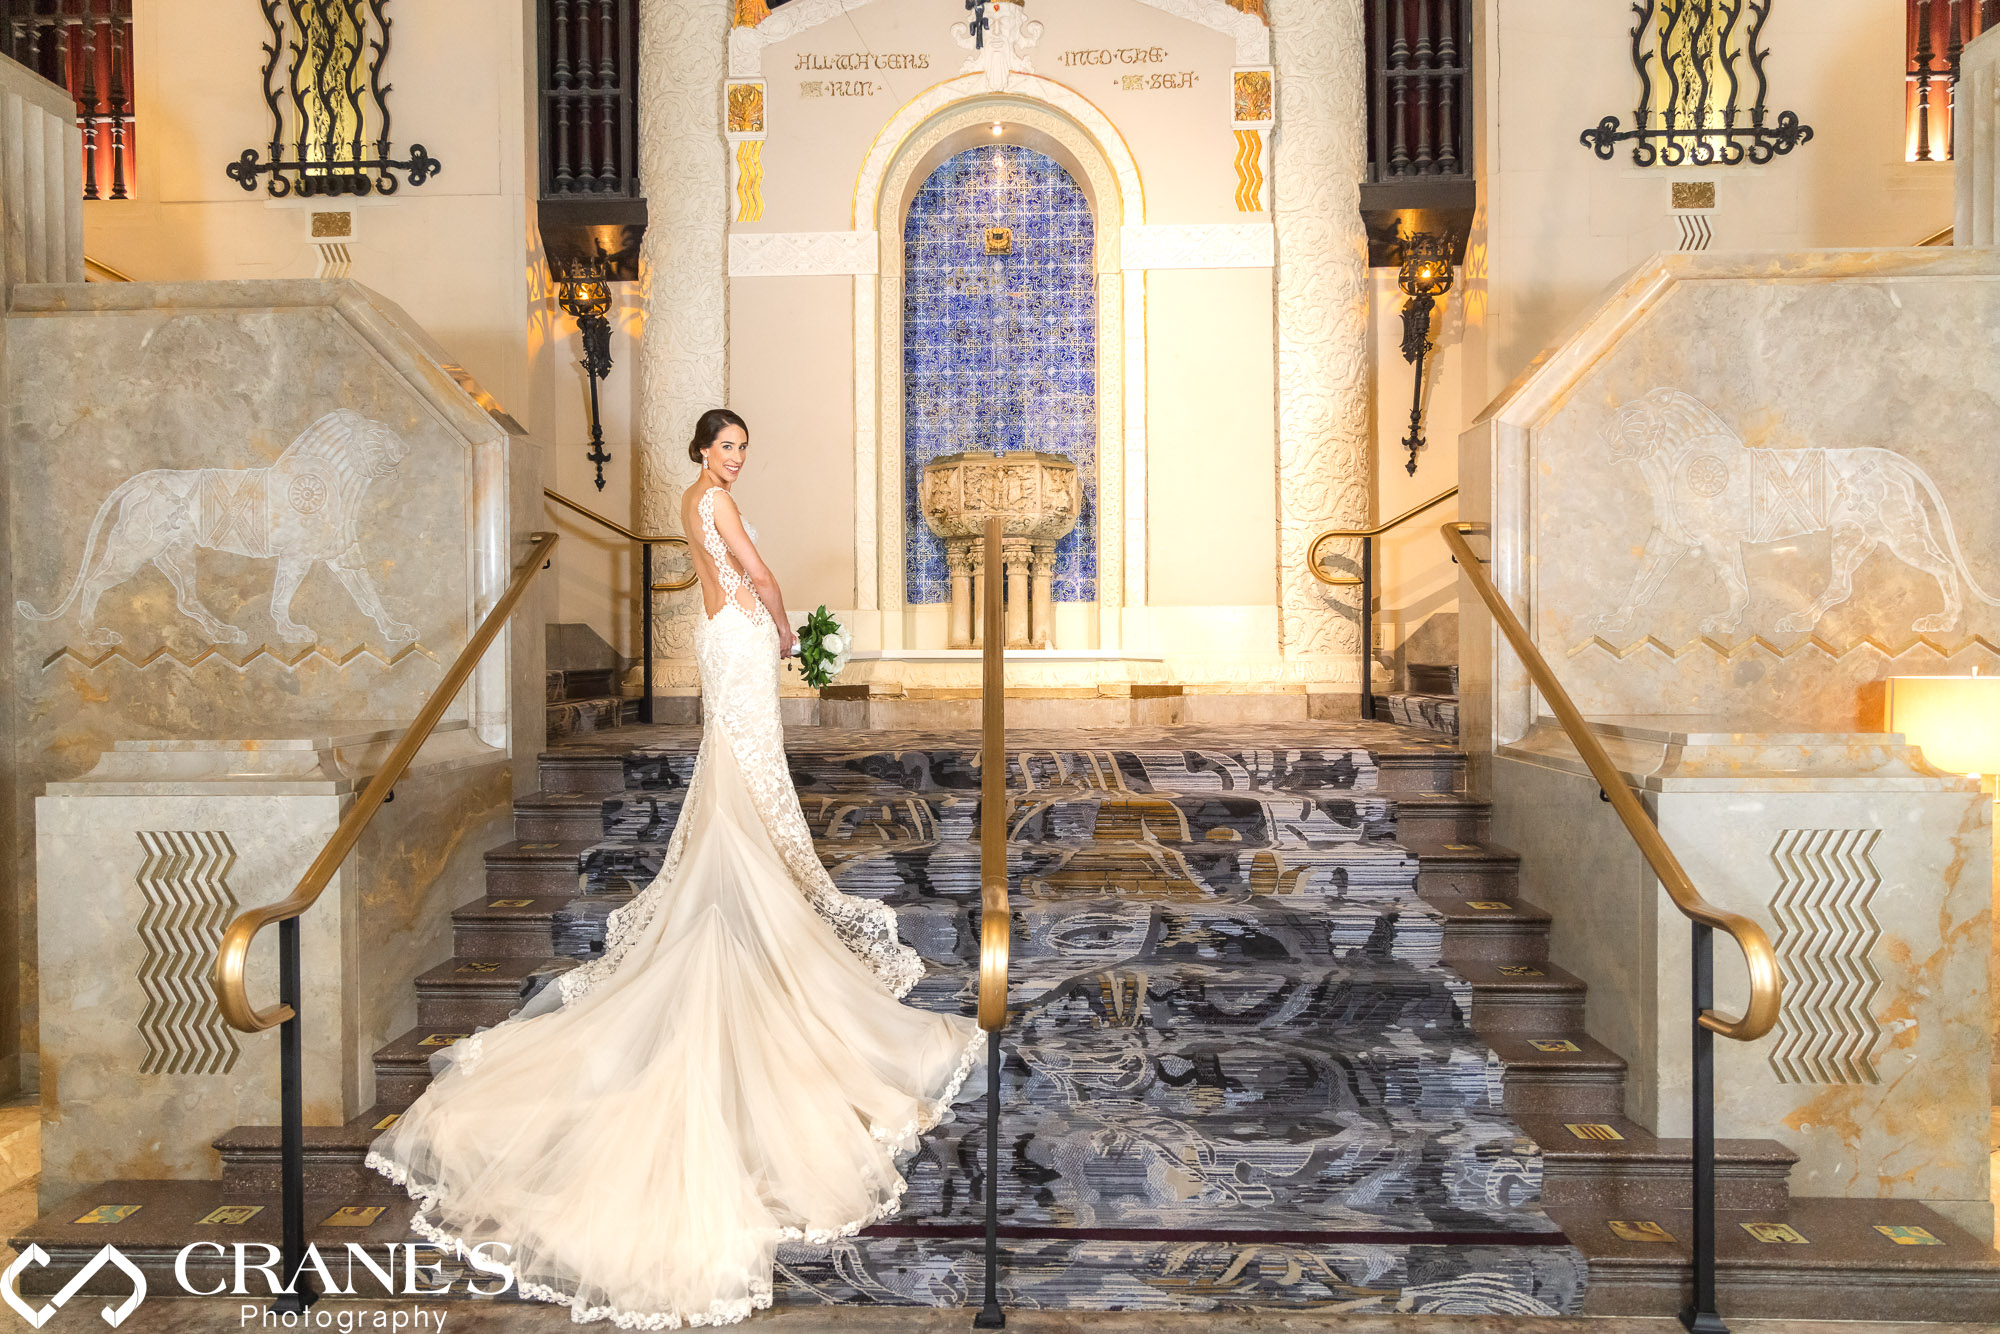 A bride wearing a designer dress is posing for a wedding portrait at the stairs at InterContinental in Chicago